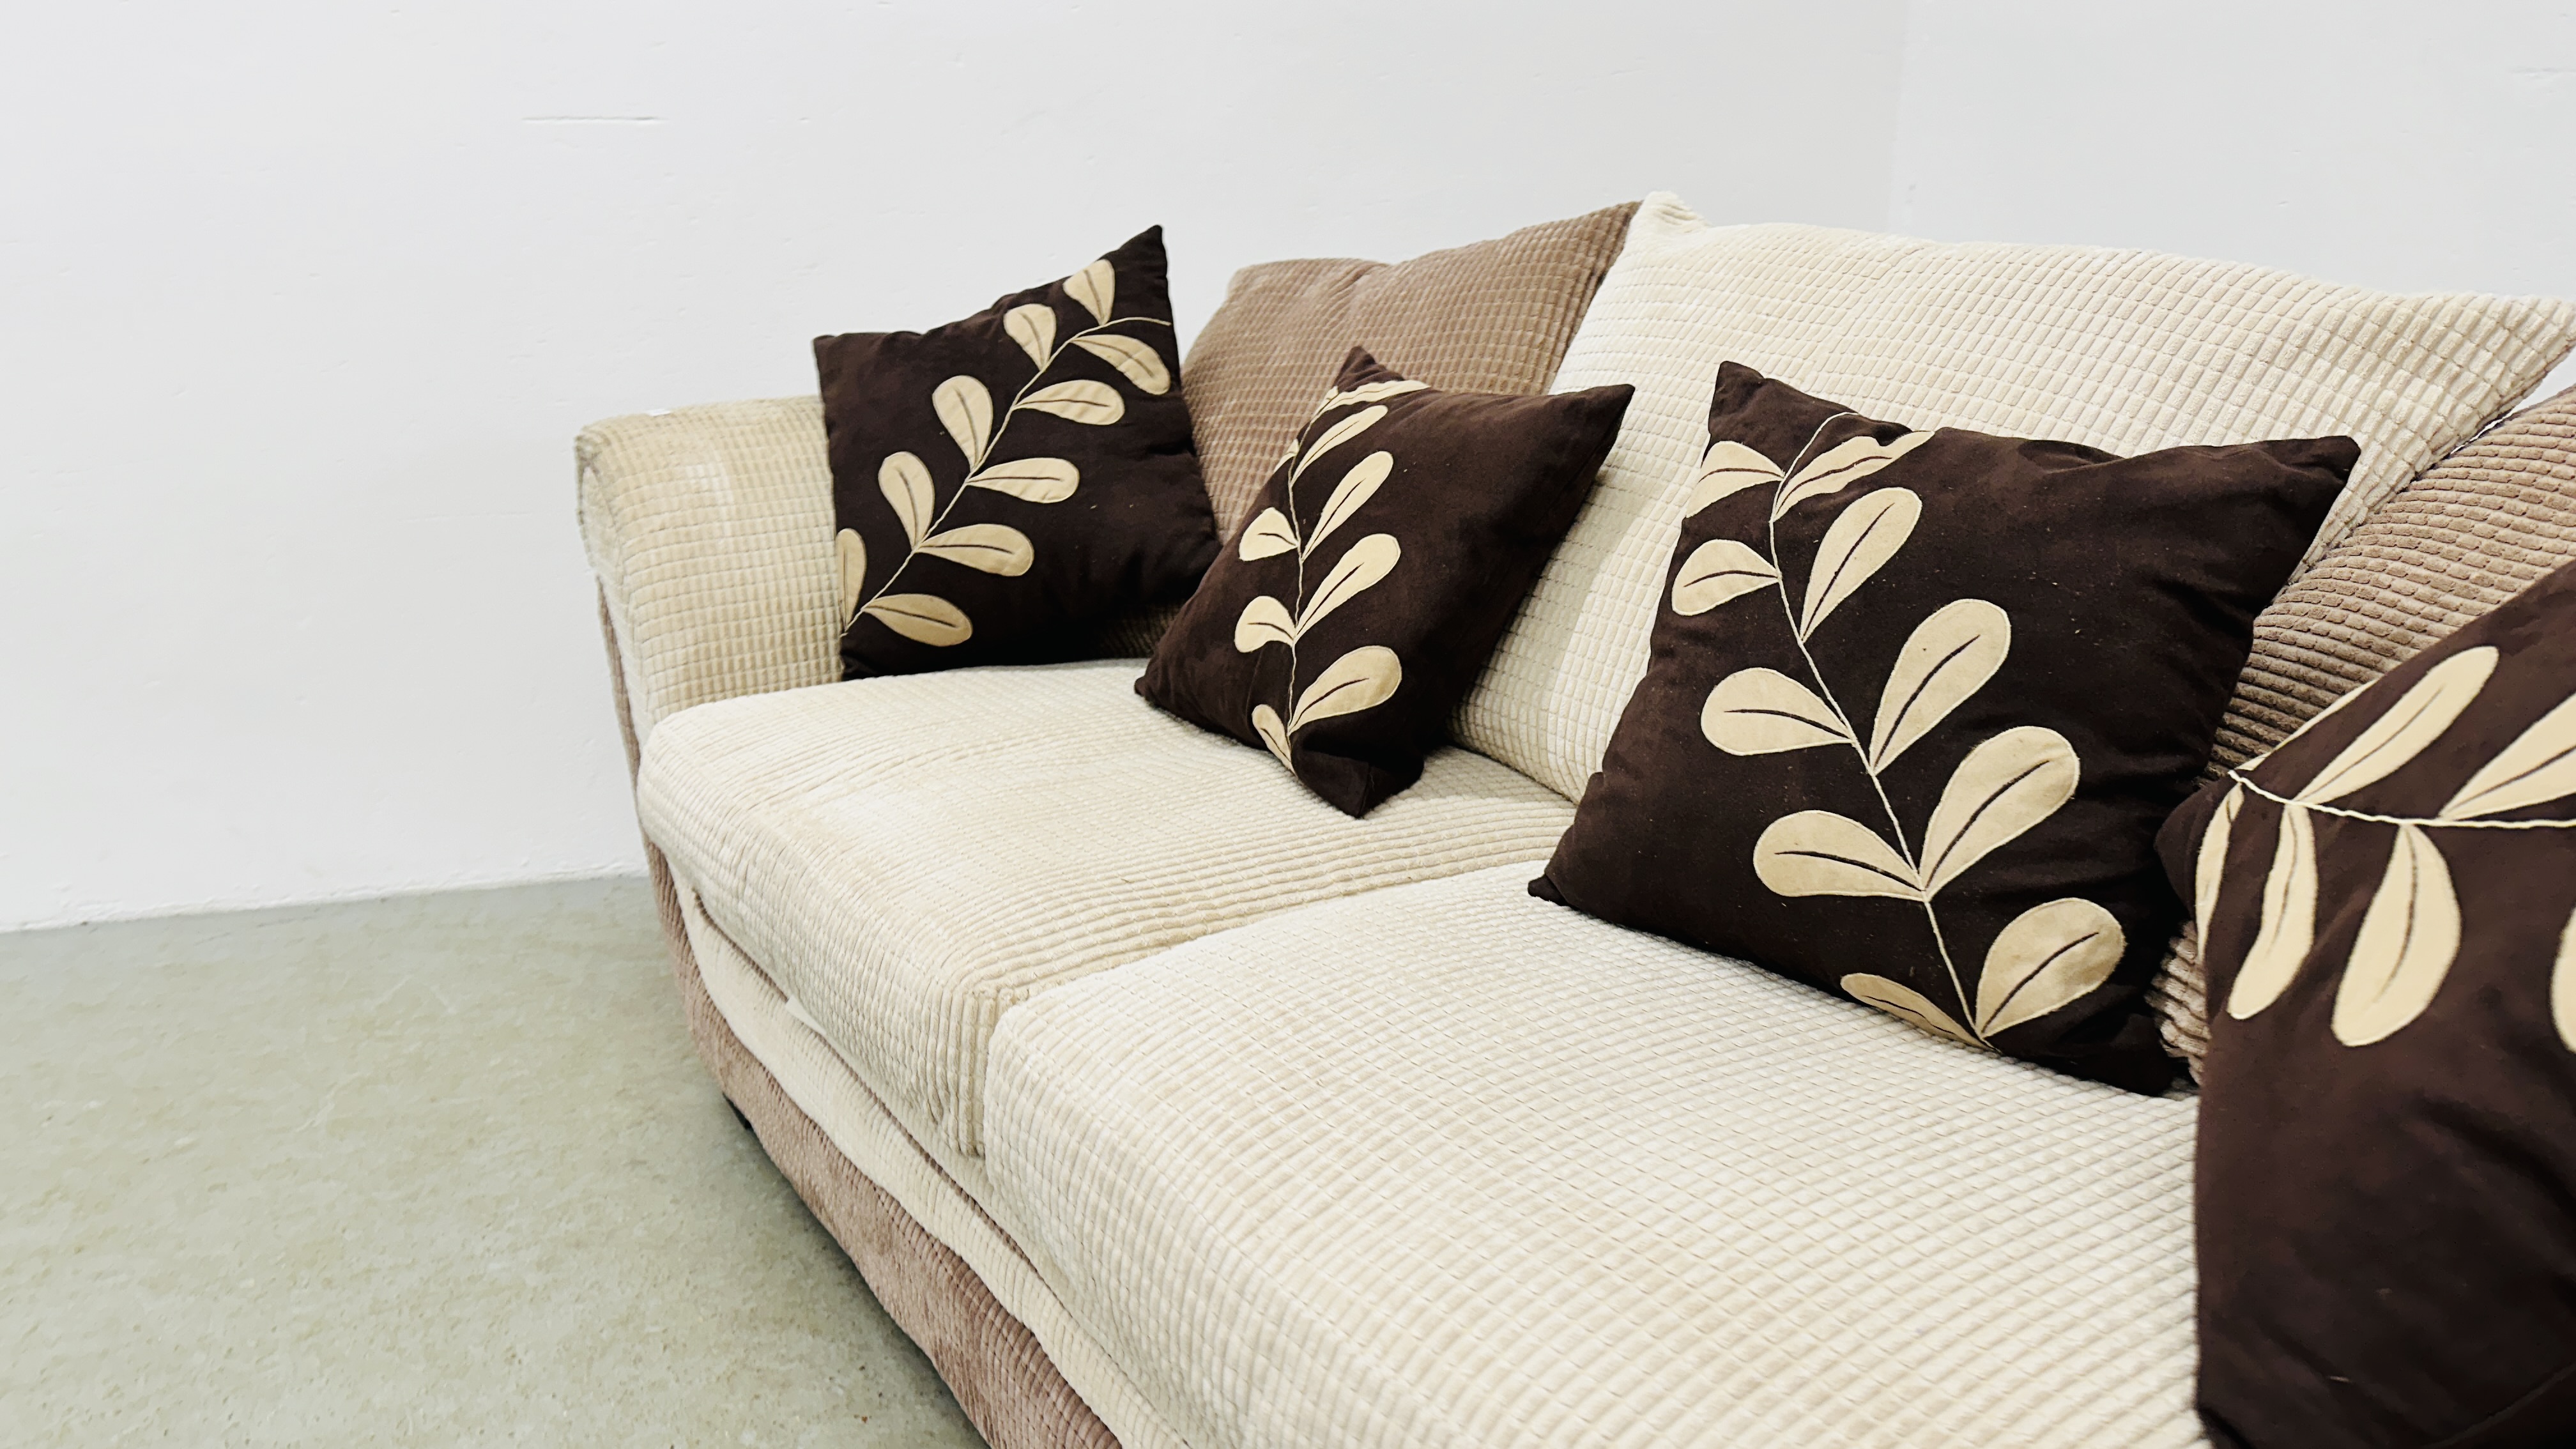 A MODERN CREAM AND MOCHA UPHOLSTERED DFS THREE SEATER SOFA + SCATTER CUSHIONS. - Image 7 of 14